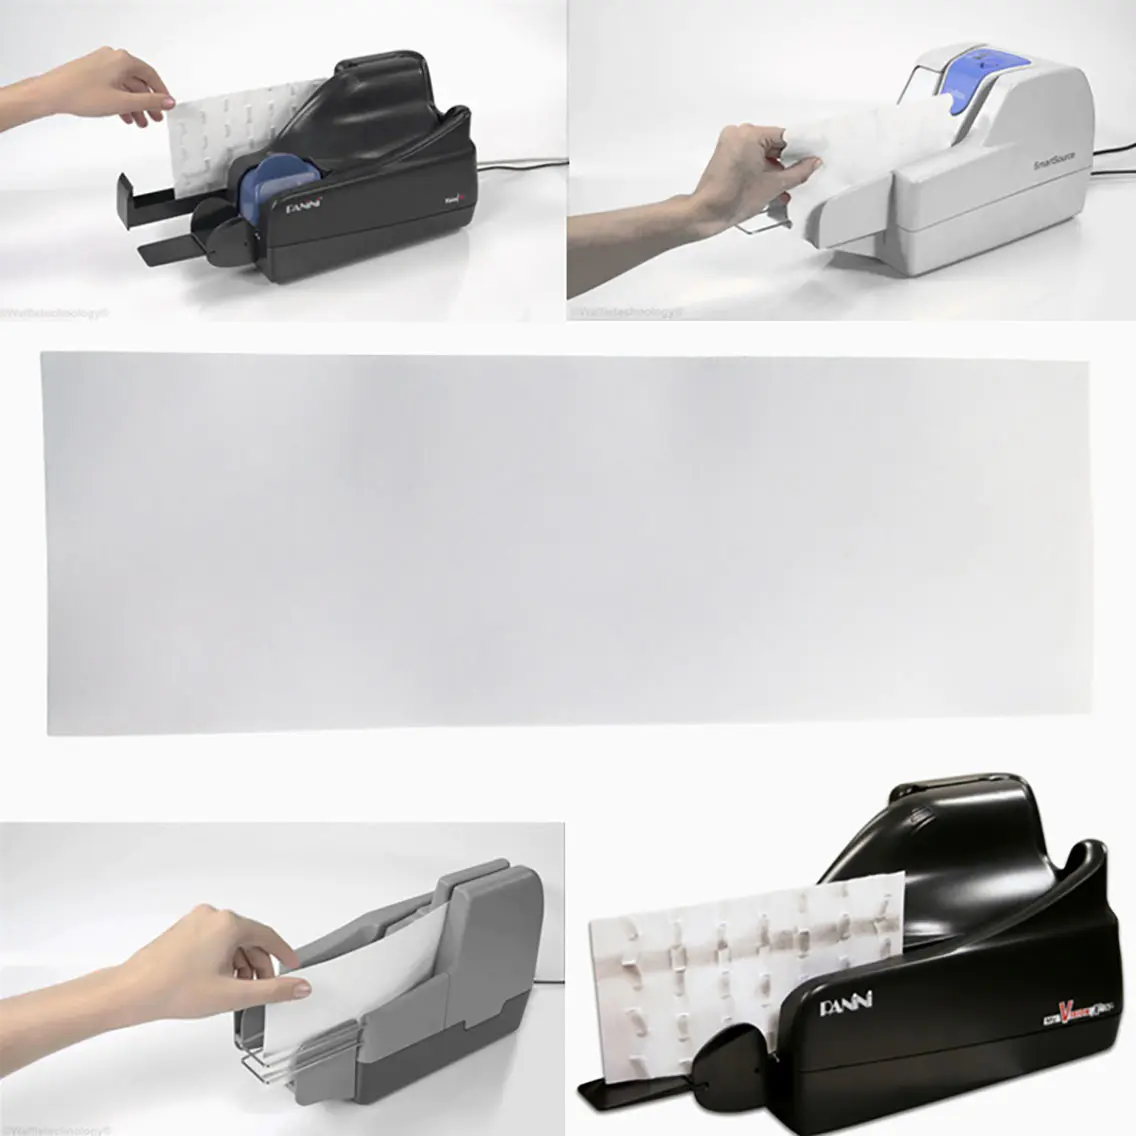 Cleanmo pvc check reader cleaning cards supplier for Digital Check TellerScan